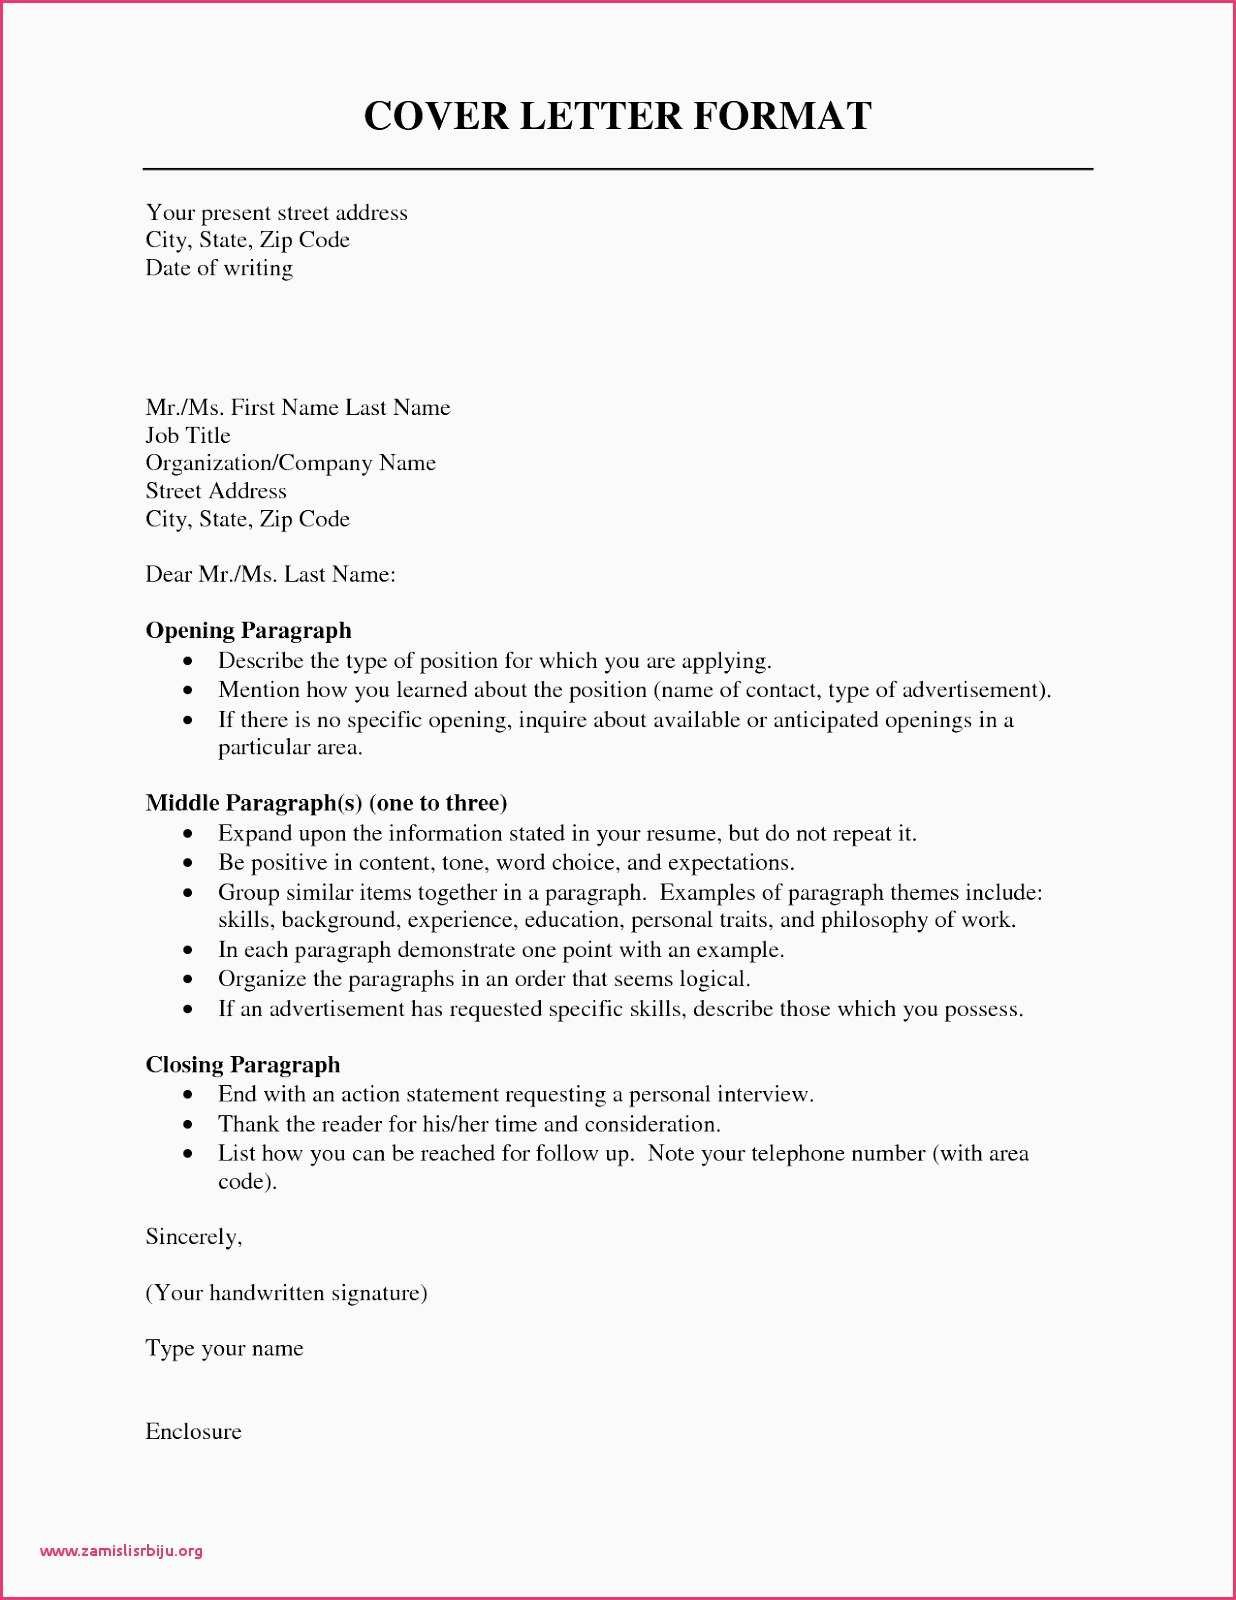 12 13 cover letter for apostille request